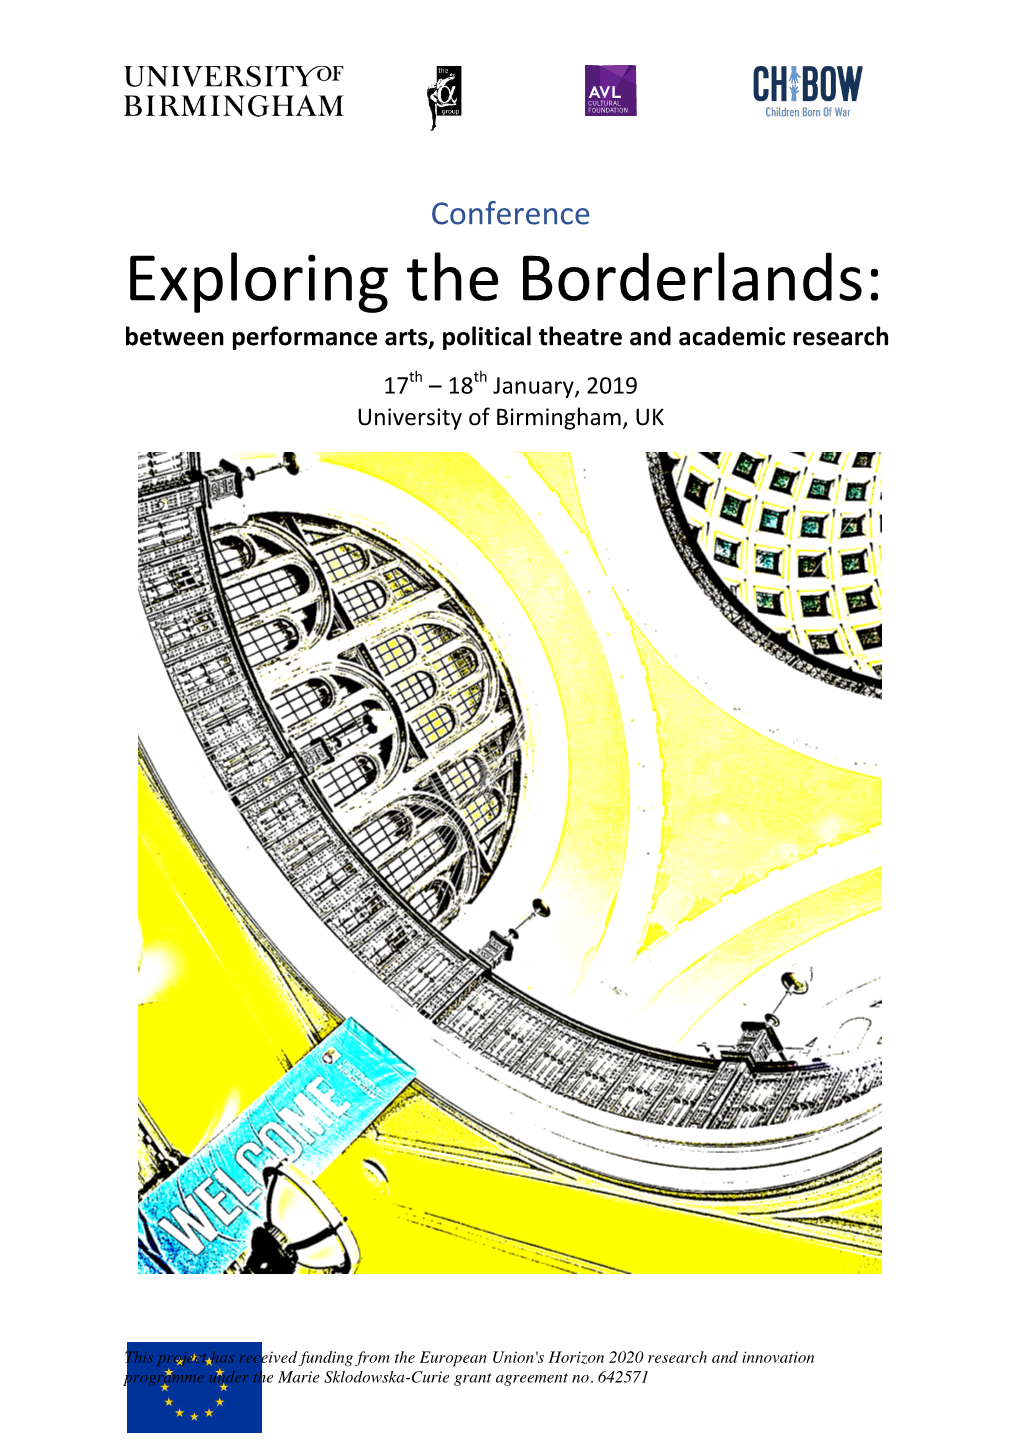 Exploring the Borderlands: Between Performance Arts, Political Theatre and Academic Research